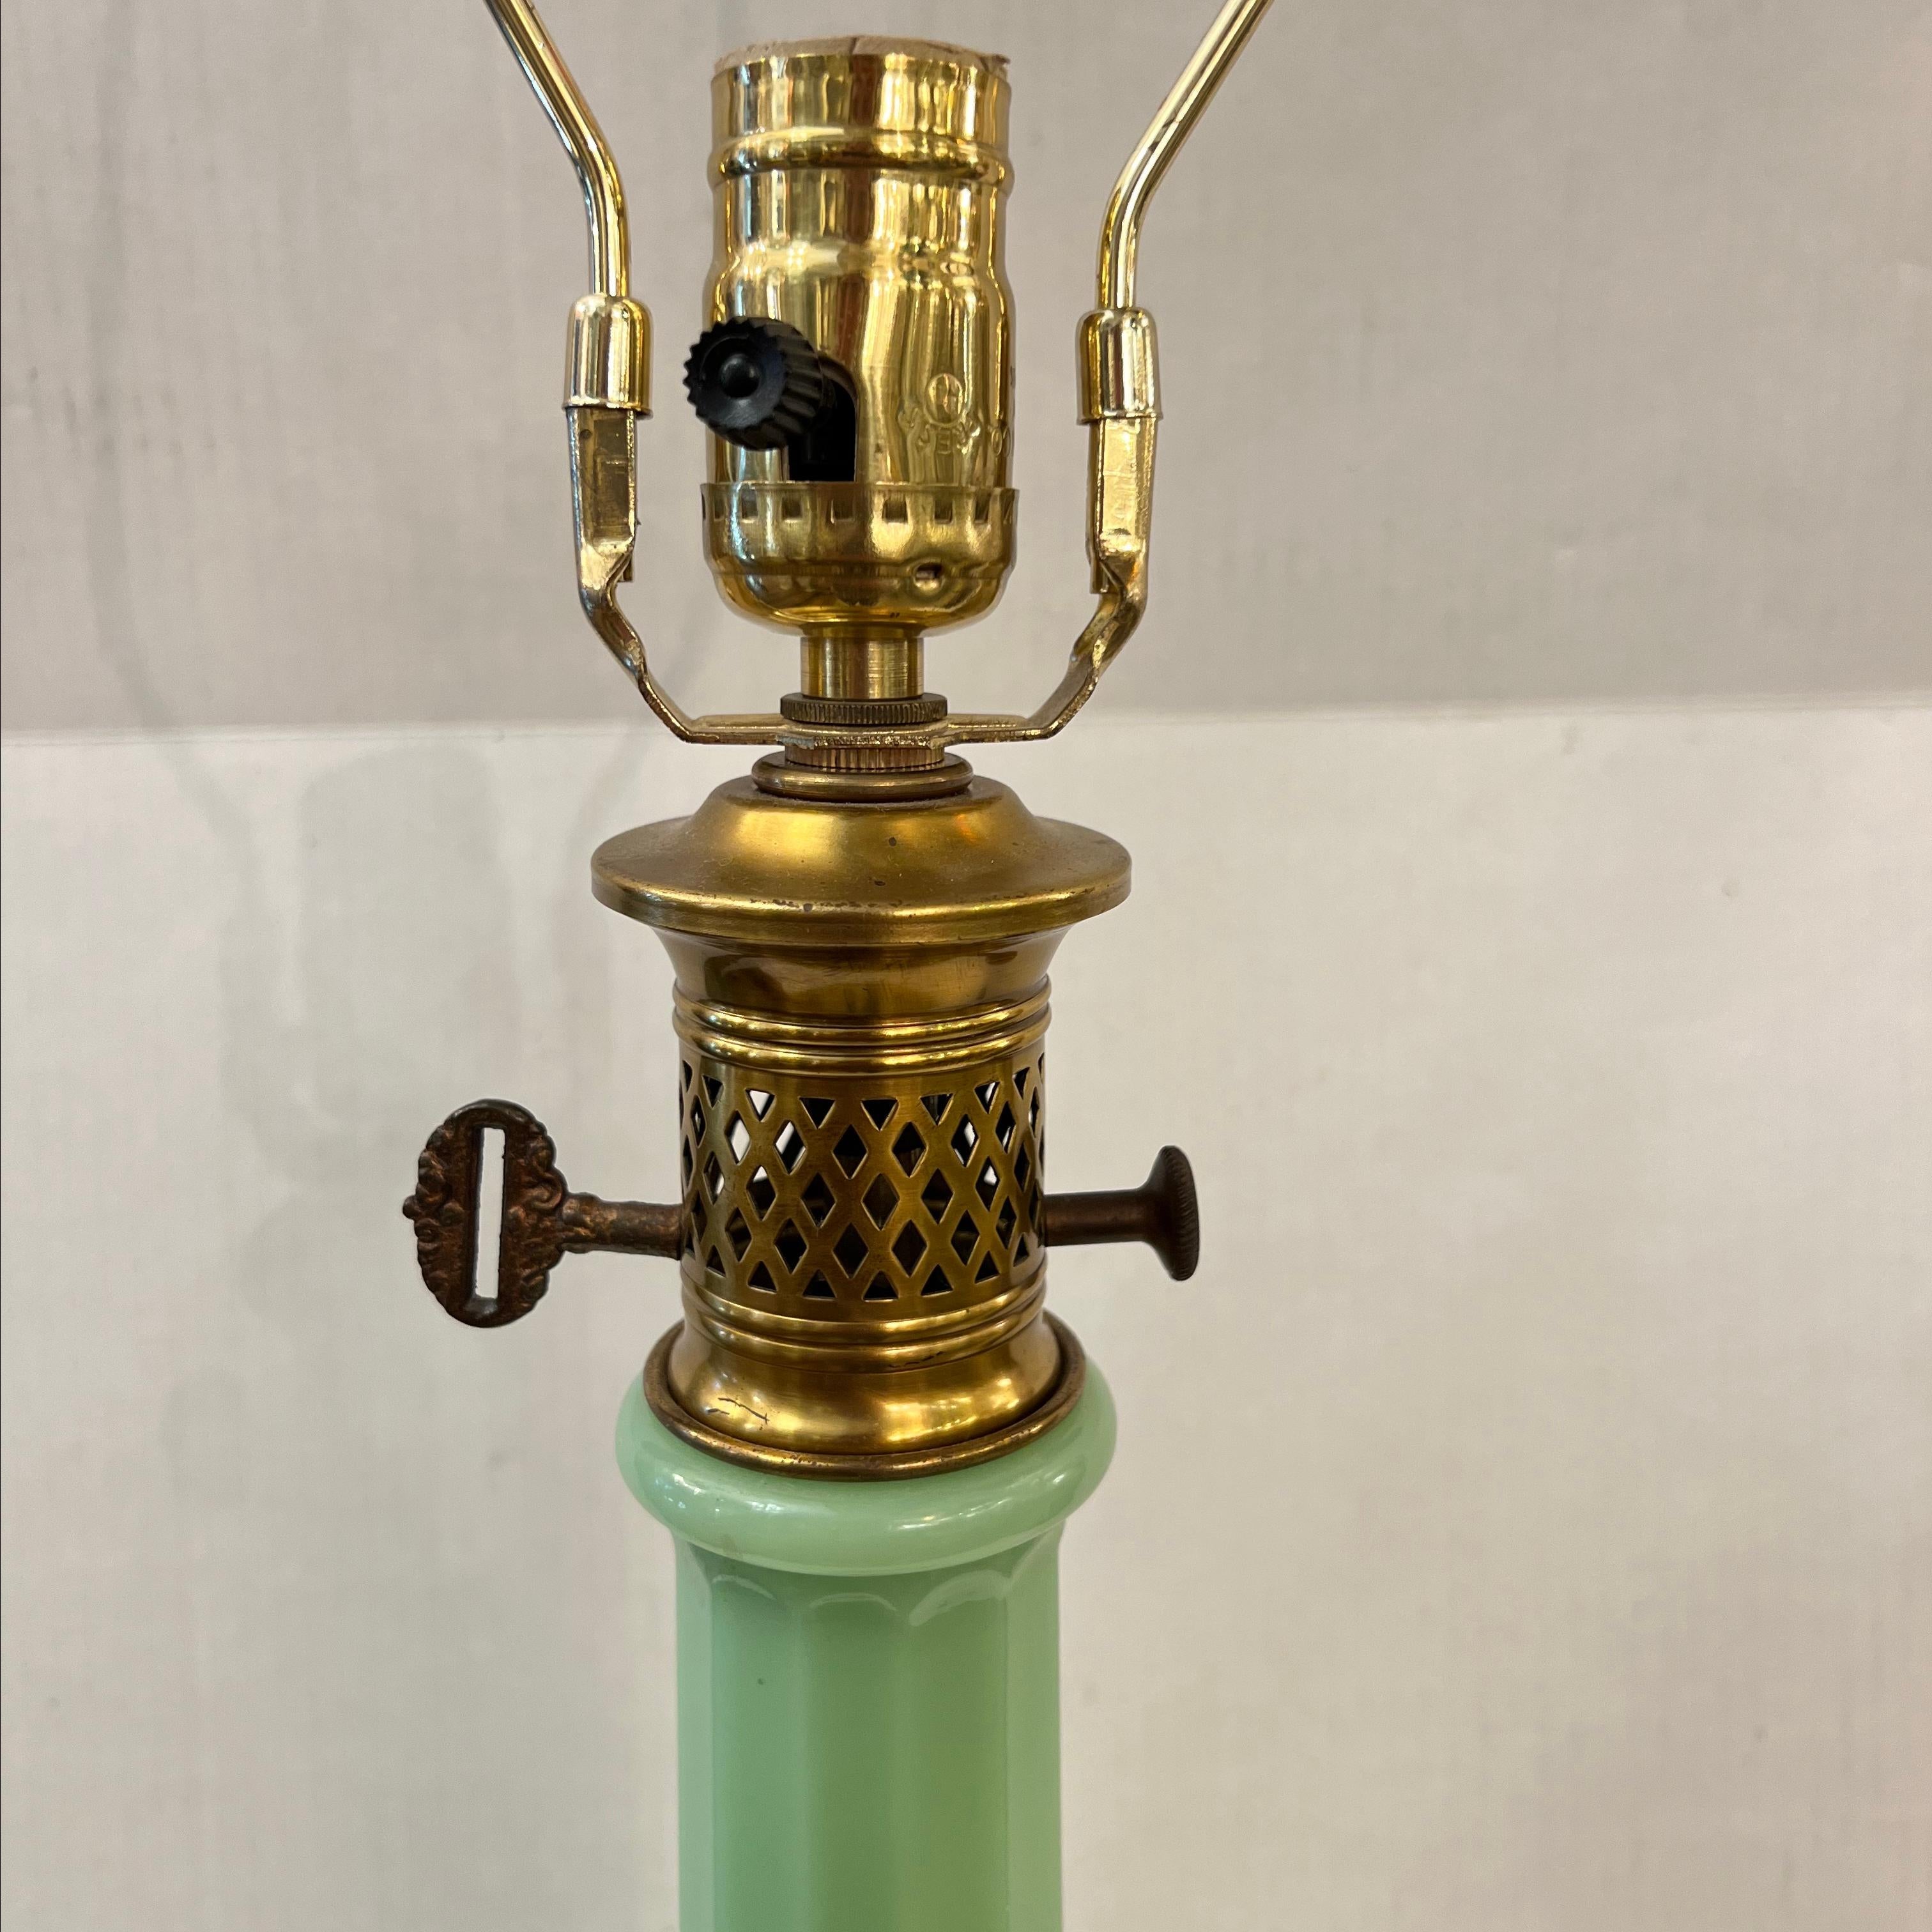 A circa 1930's French opaline glass table lamp with gilt hardware.

Measurements:
Height of body: 24.5